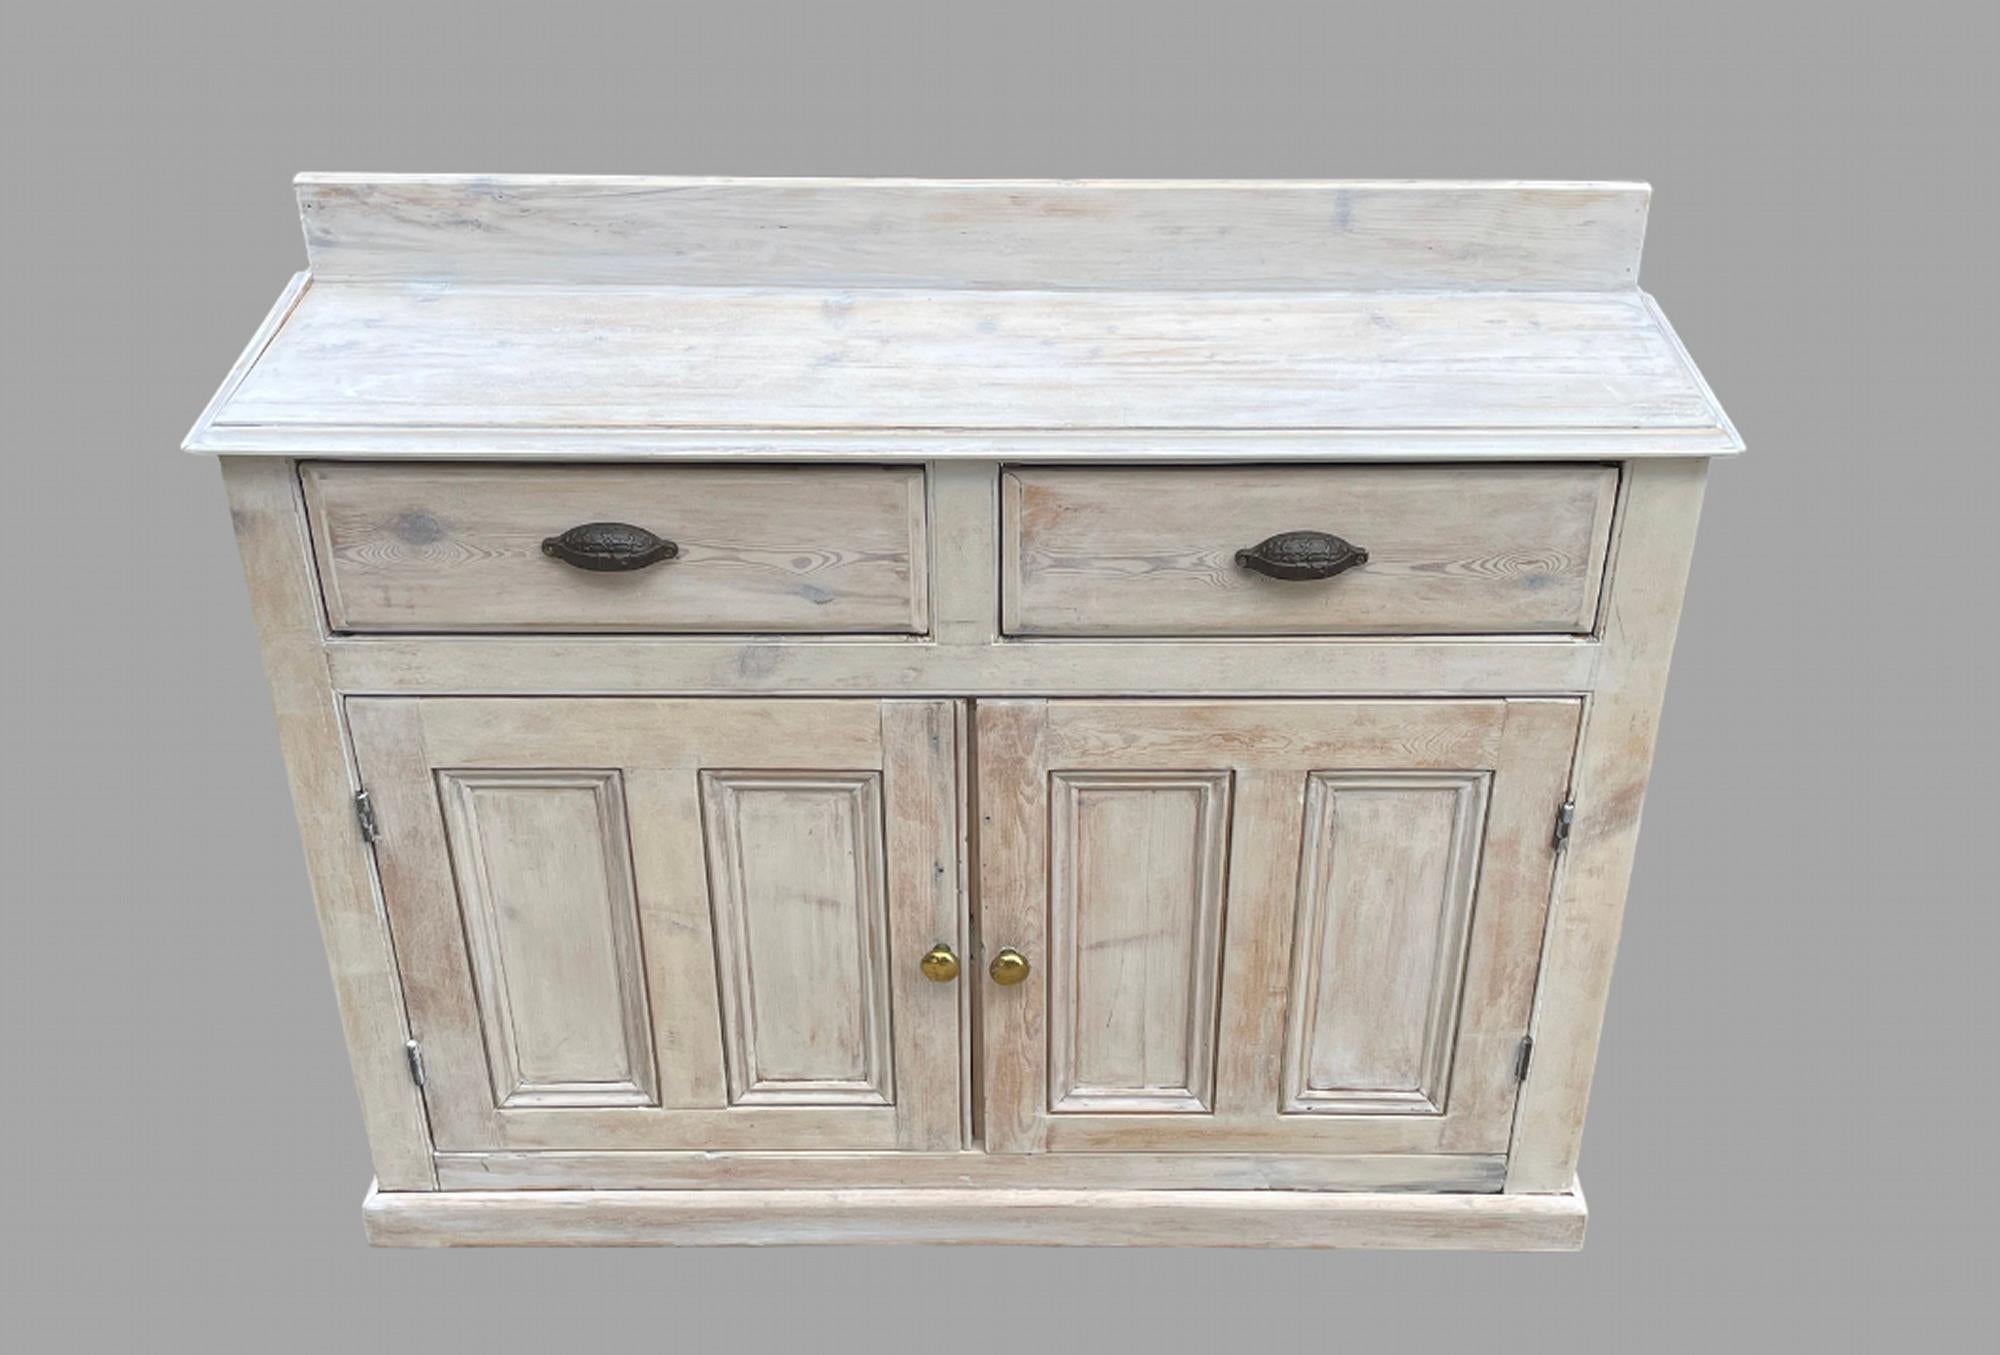 A lovely Rustic Pine Dresser or a sideboard that has been stripped and limed with two drawers and two cupboards and with a shelf.